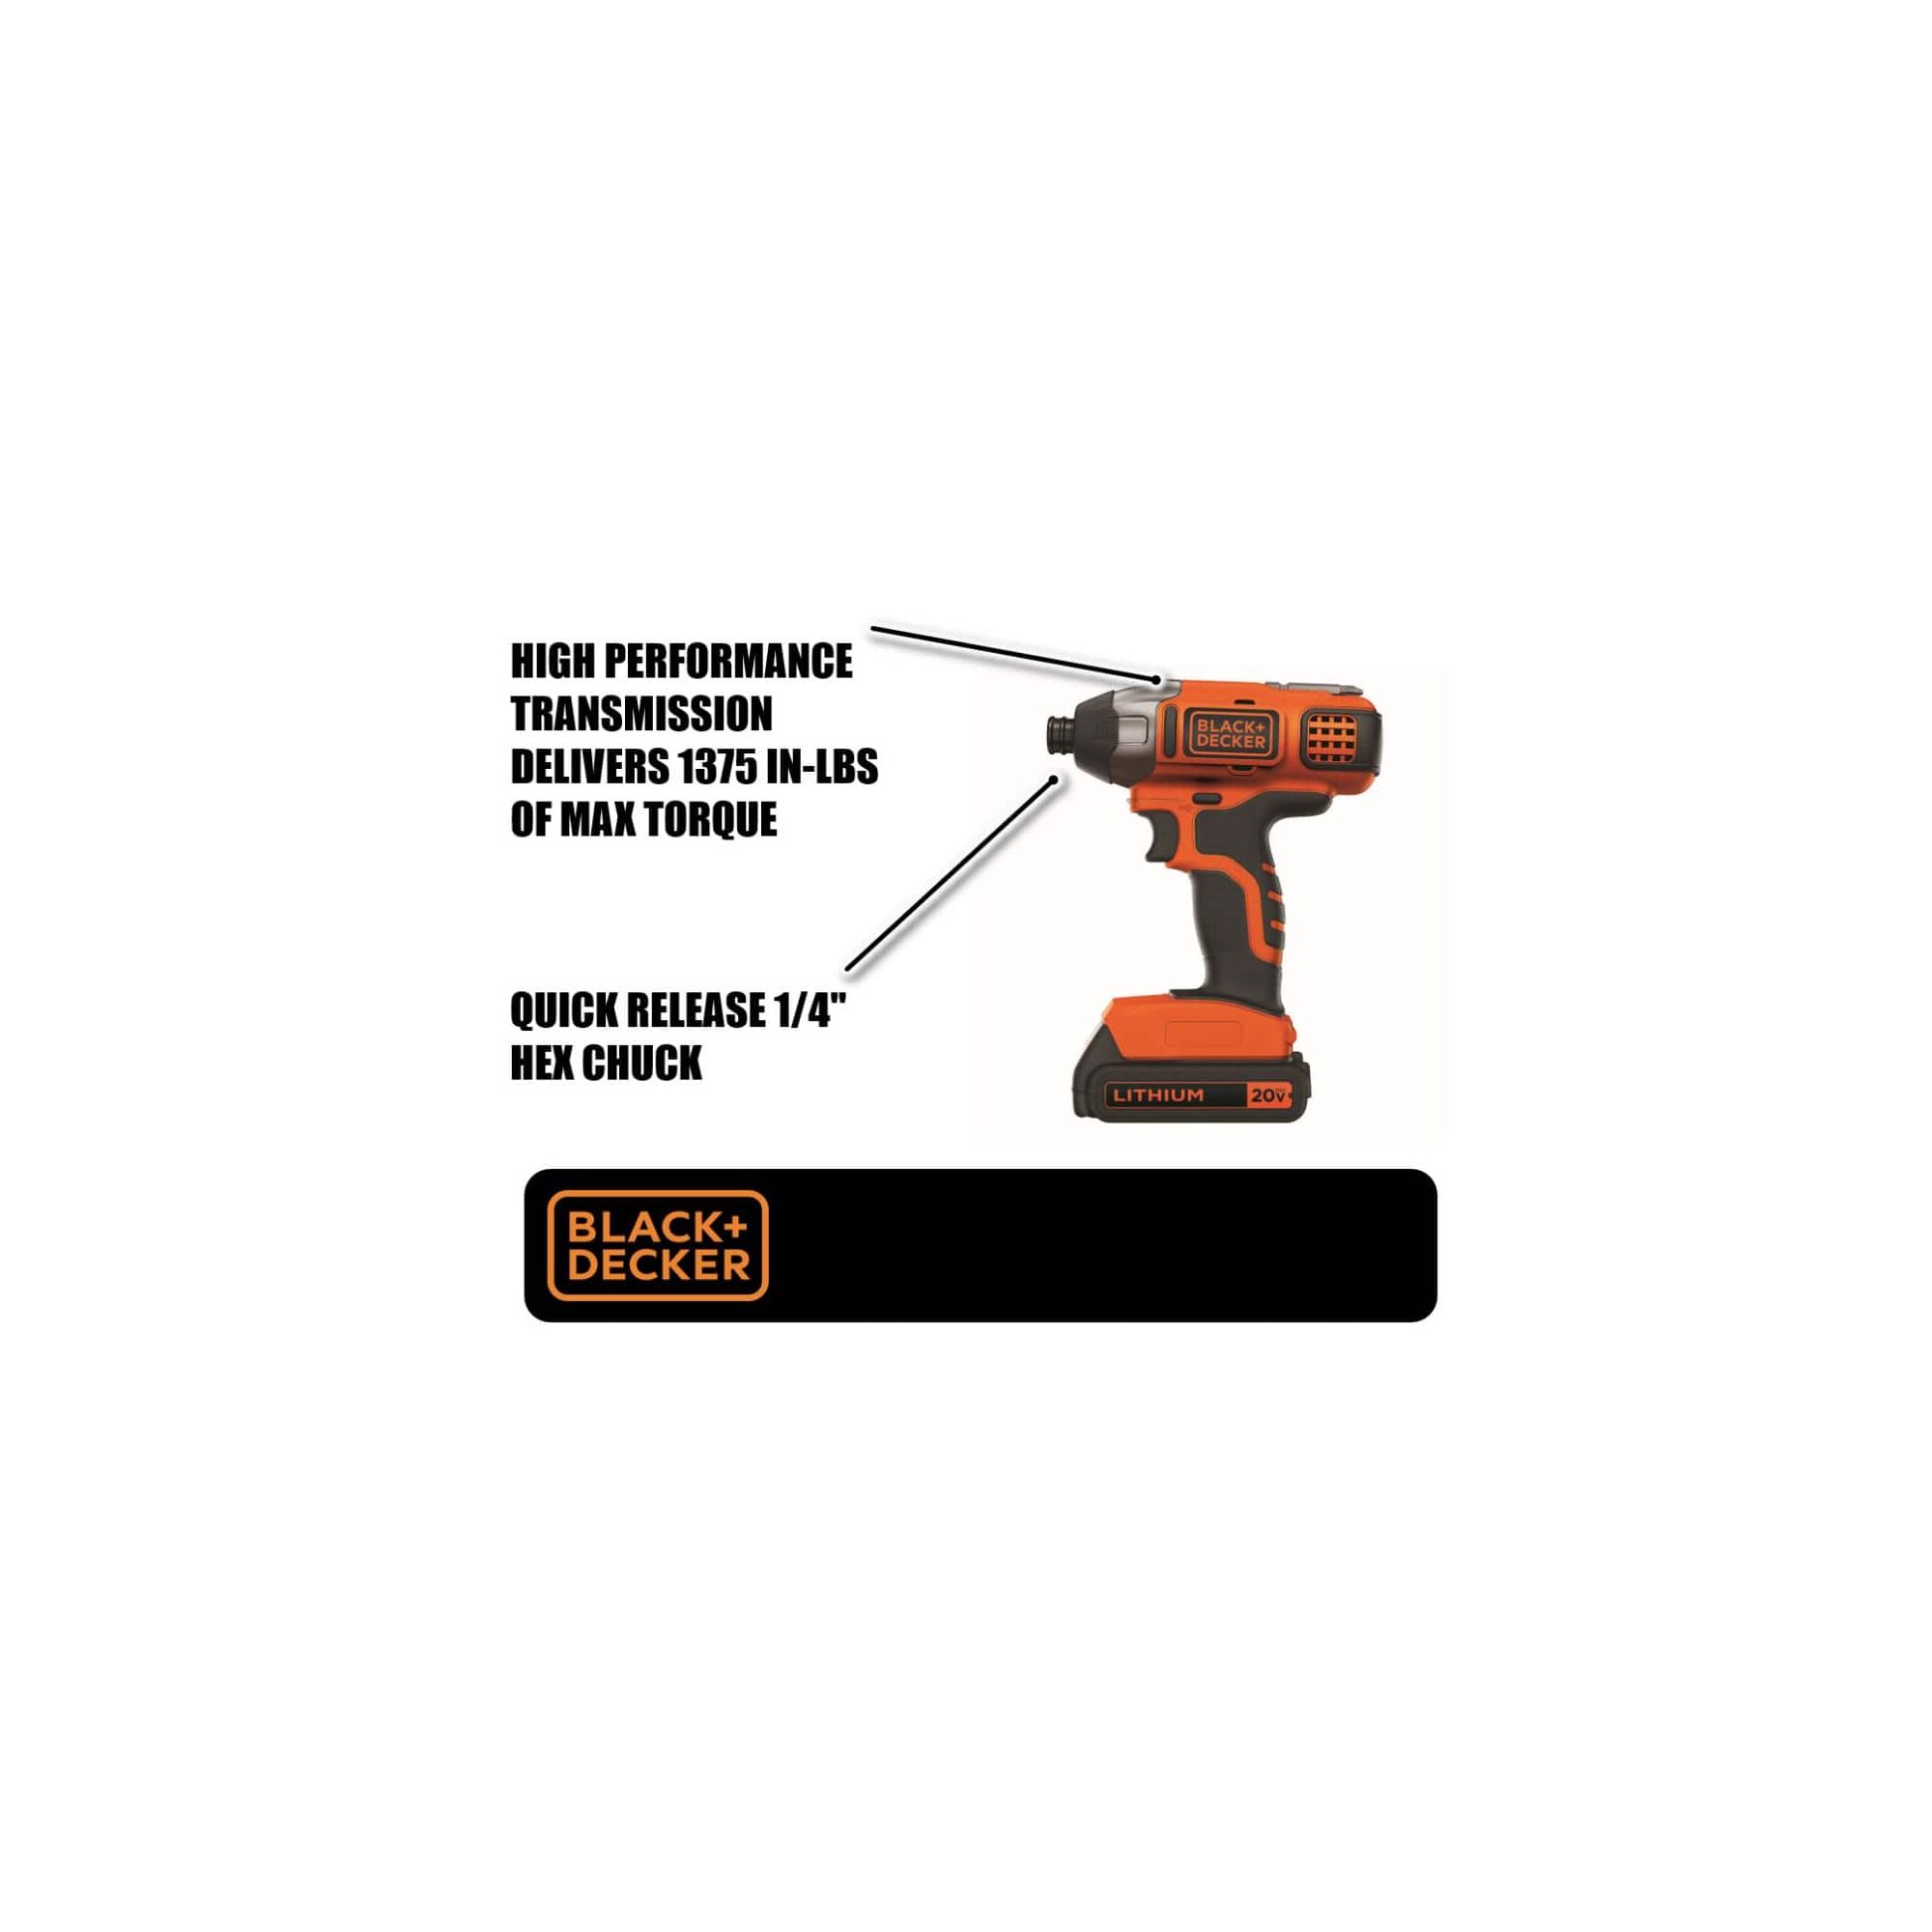 20 volt max Powerconnect Lithium Impact Driver with product features showing